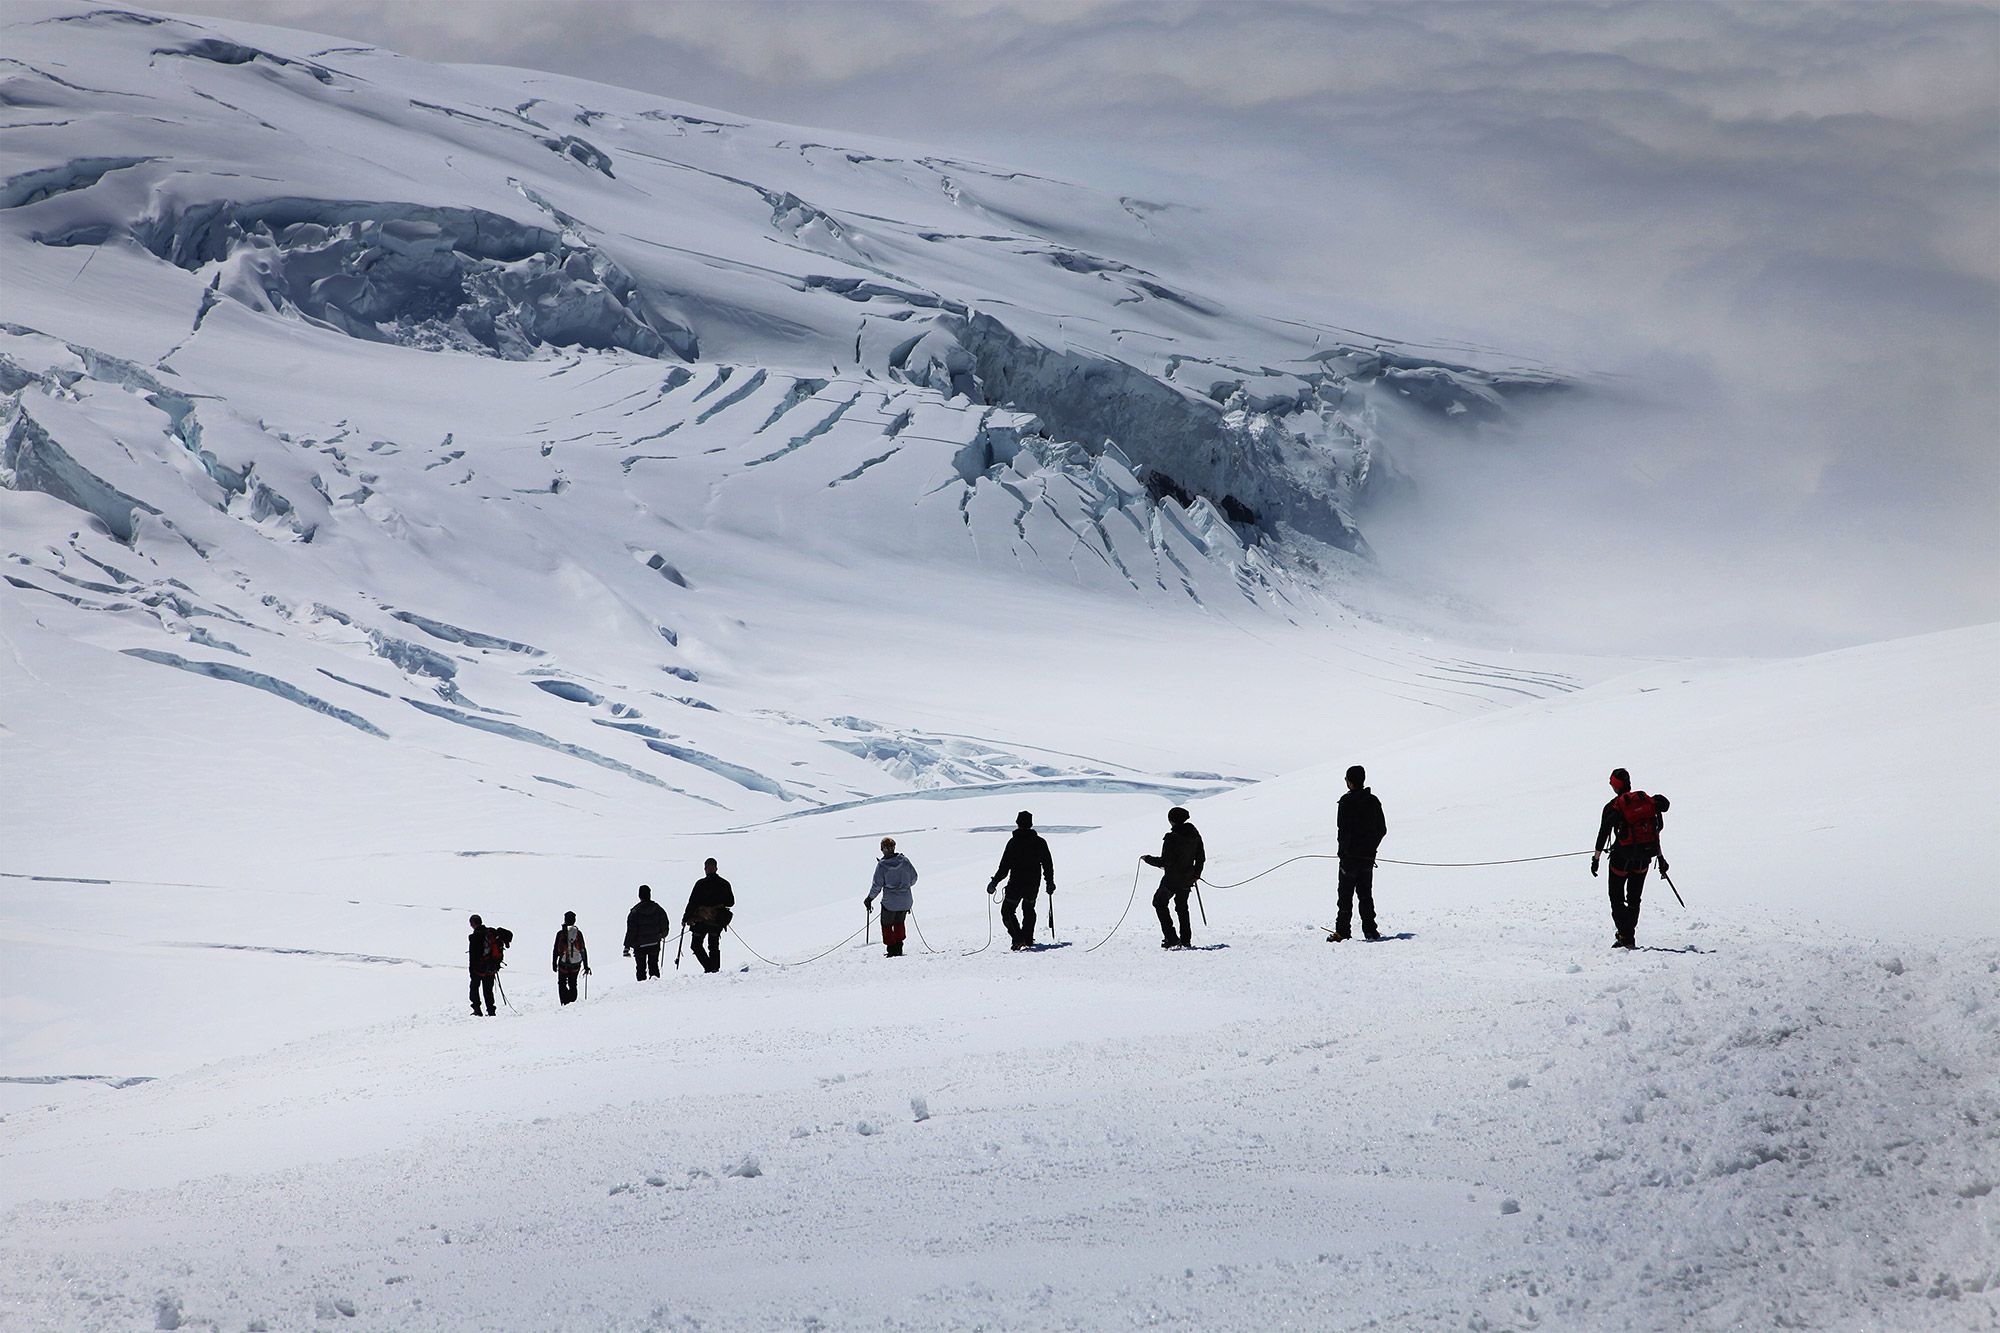 Climbers crossing the snowy mountains in Iceland, while roped together.